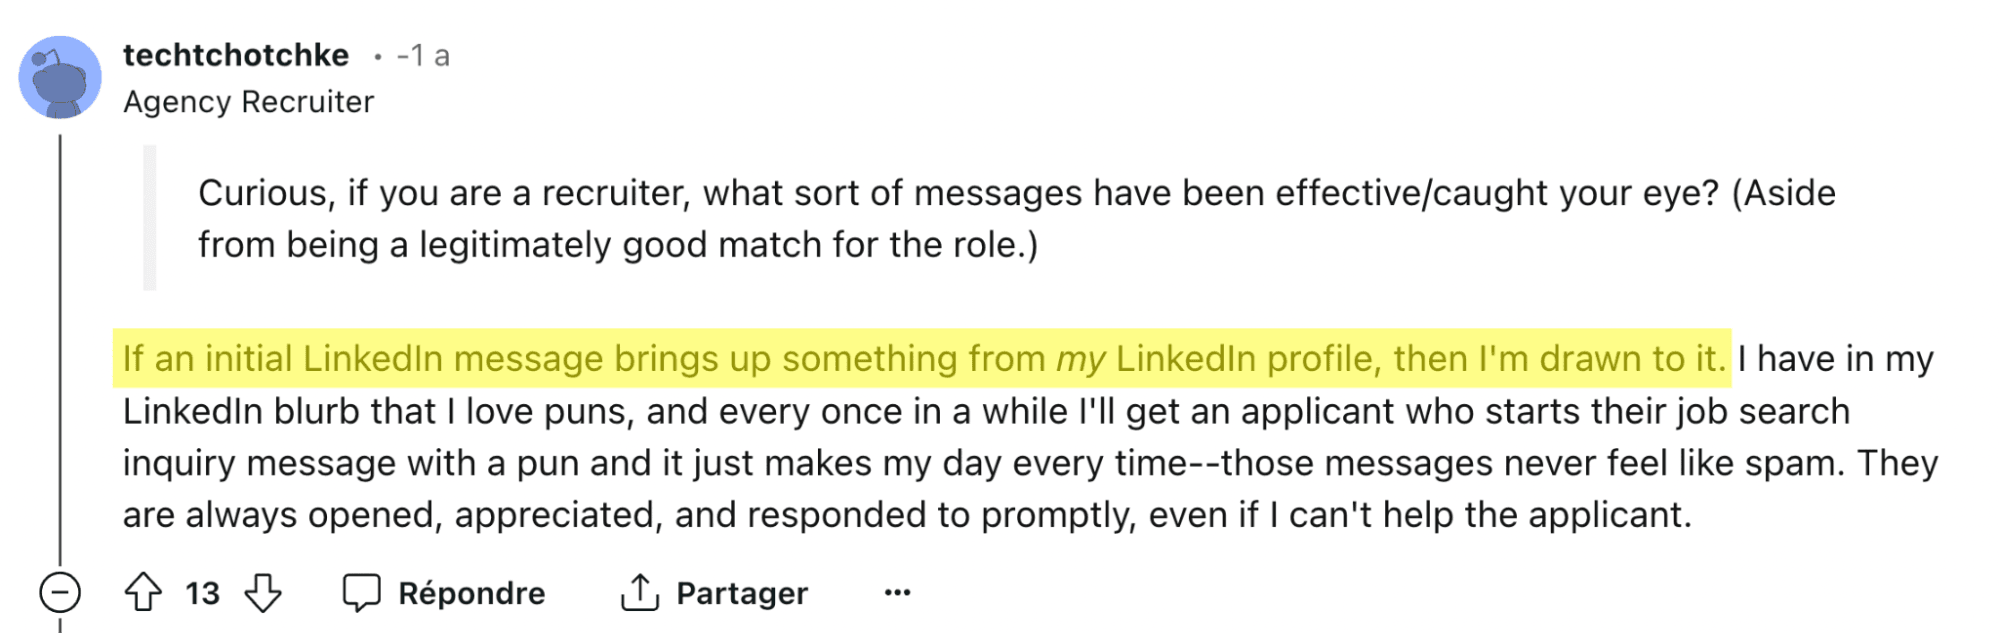 bring something from my profile reddit recruiter advice - image32.png